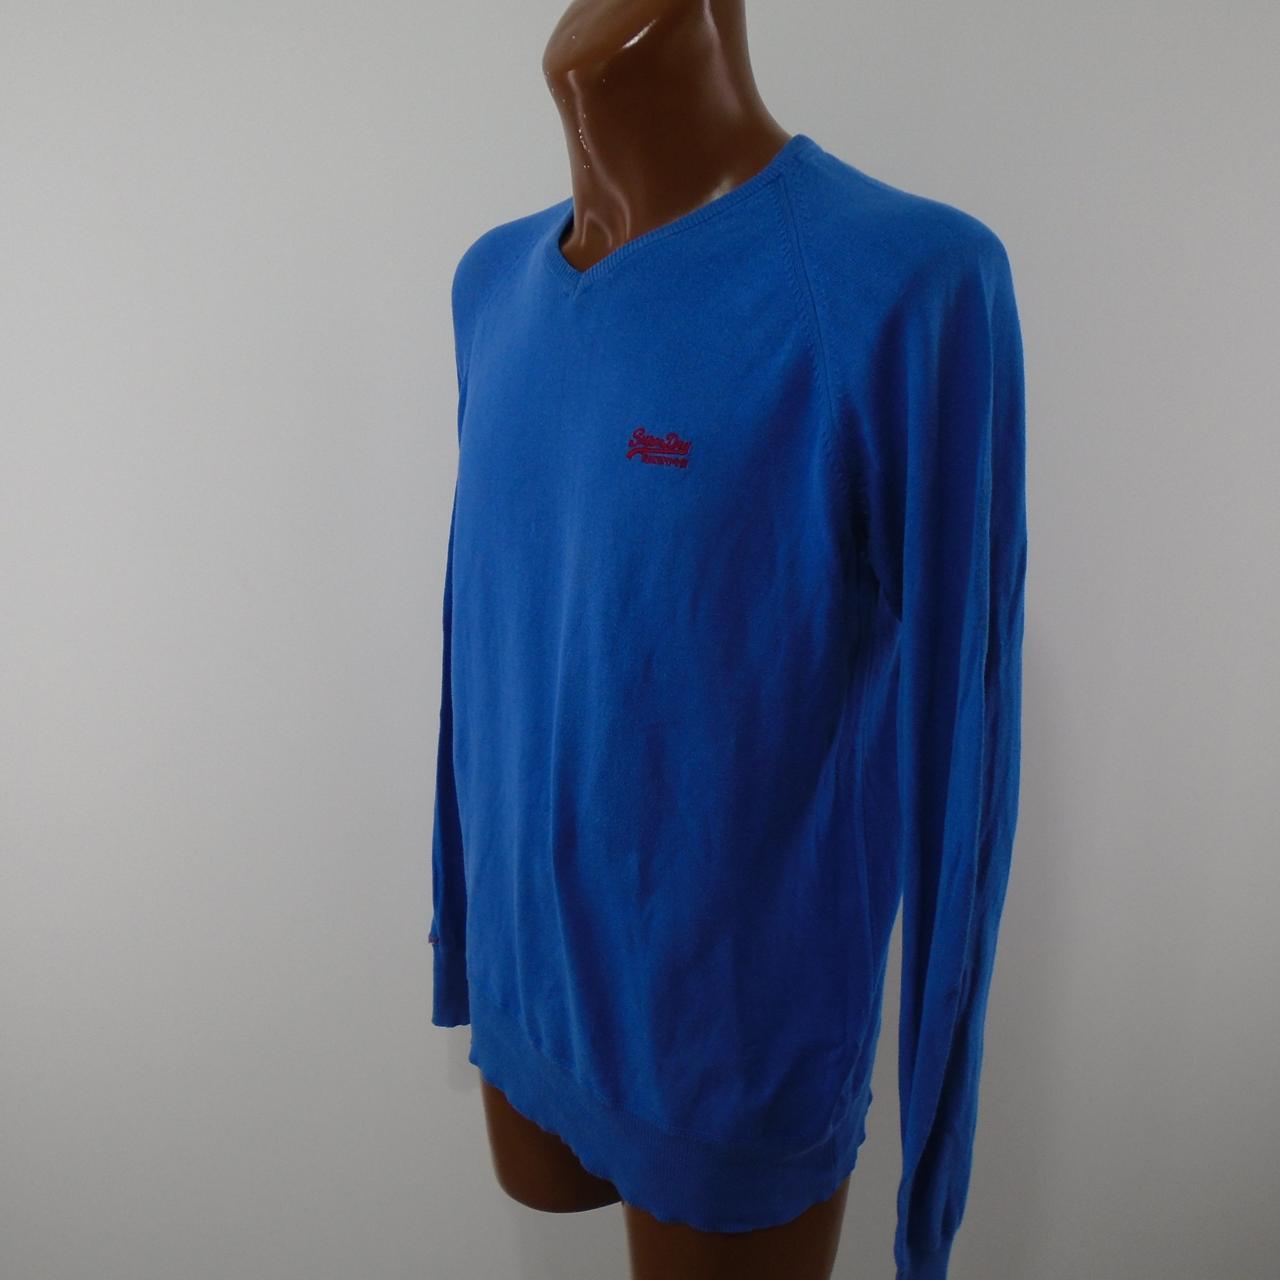 Men's Sweater Superdry. Blue. L. Used. Good